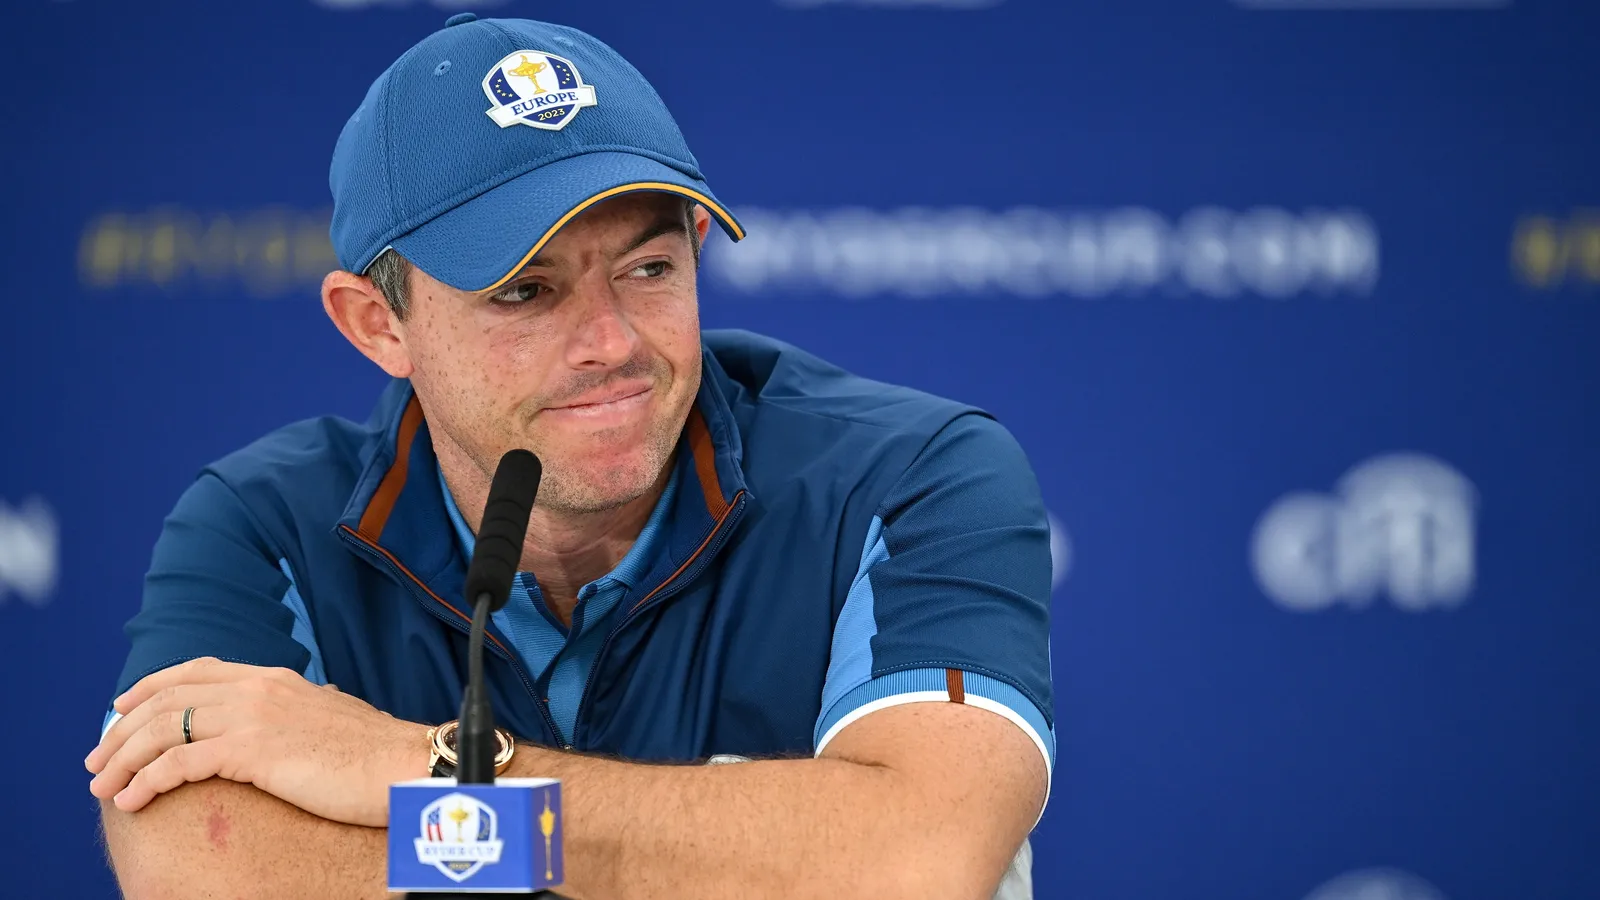 LIV Players Will Miss Ryder Cup More Than We'll Miss Them - McIlroy